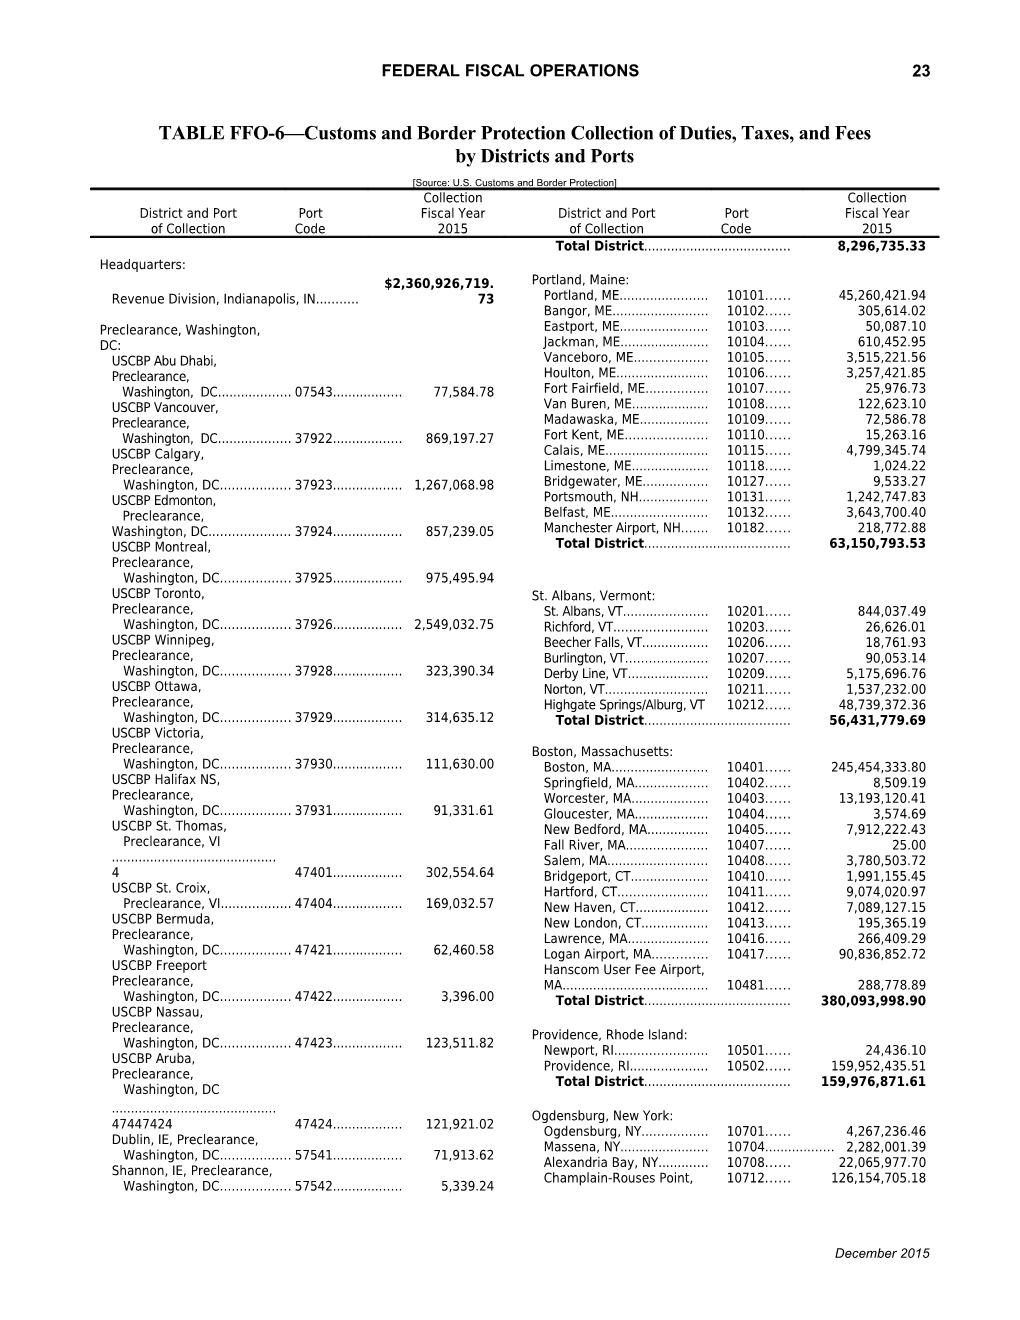 March 2002 Treasury Bulletin Printing Sequence Sheet As of 7/21/02